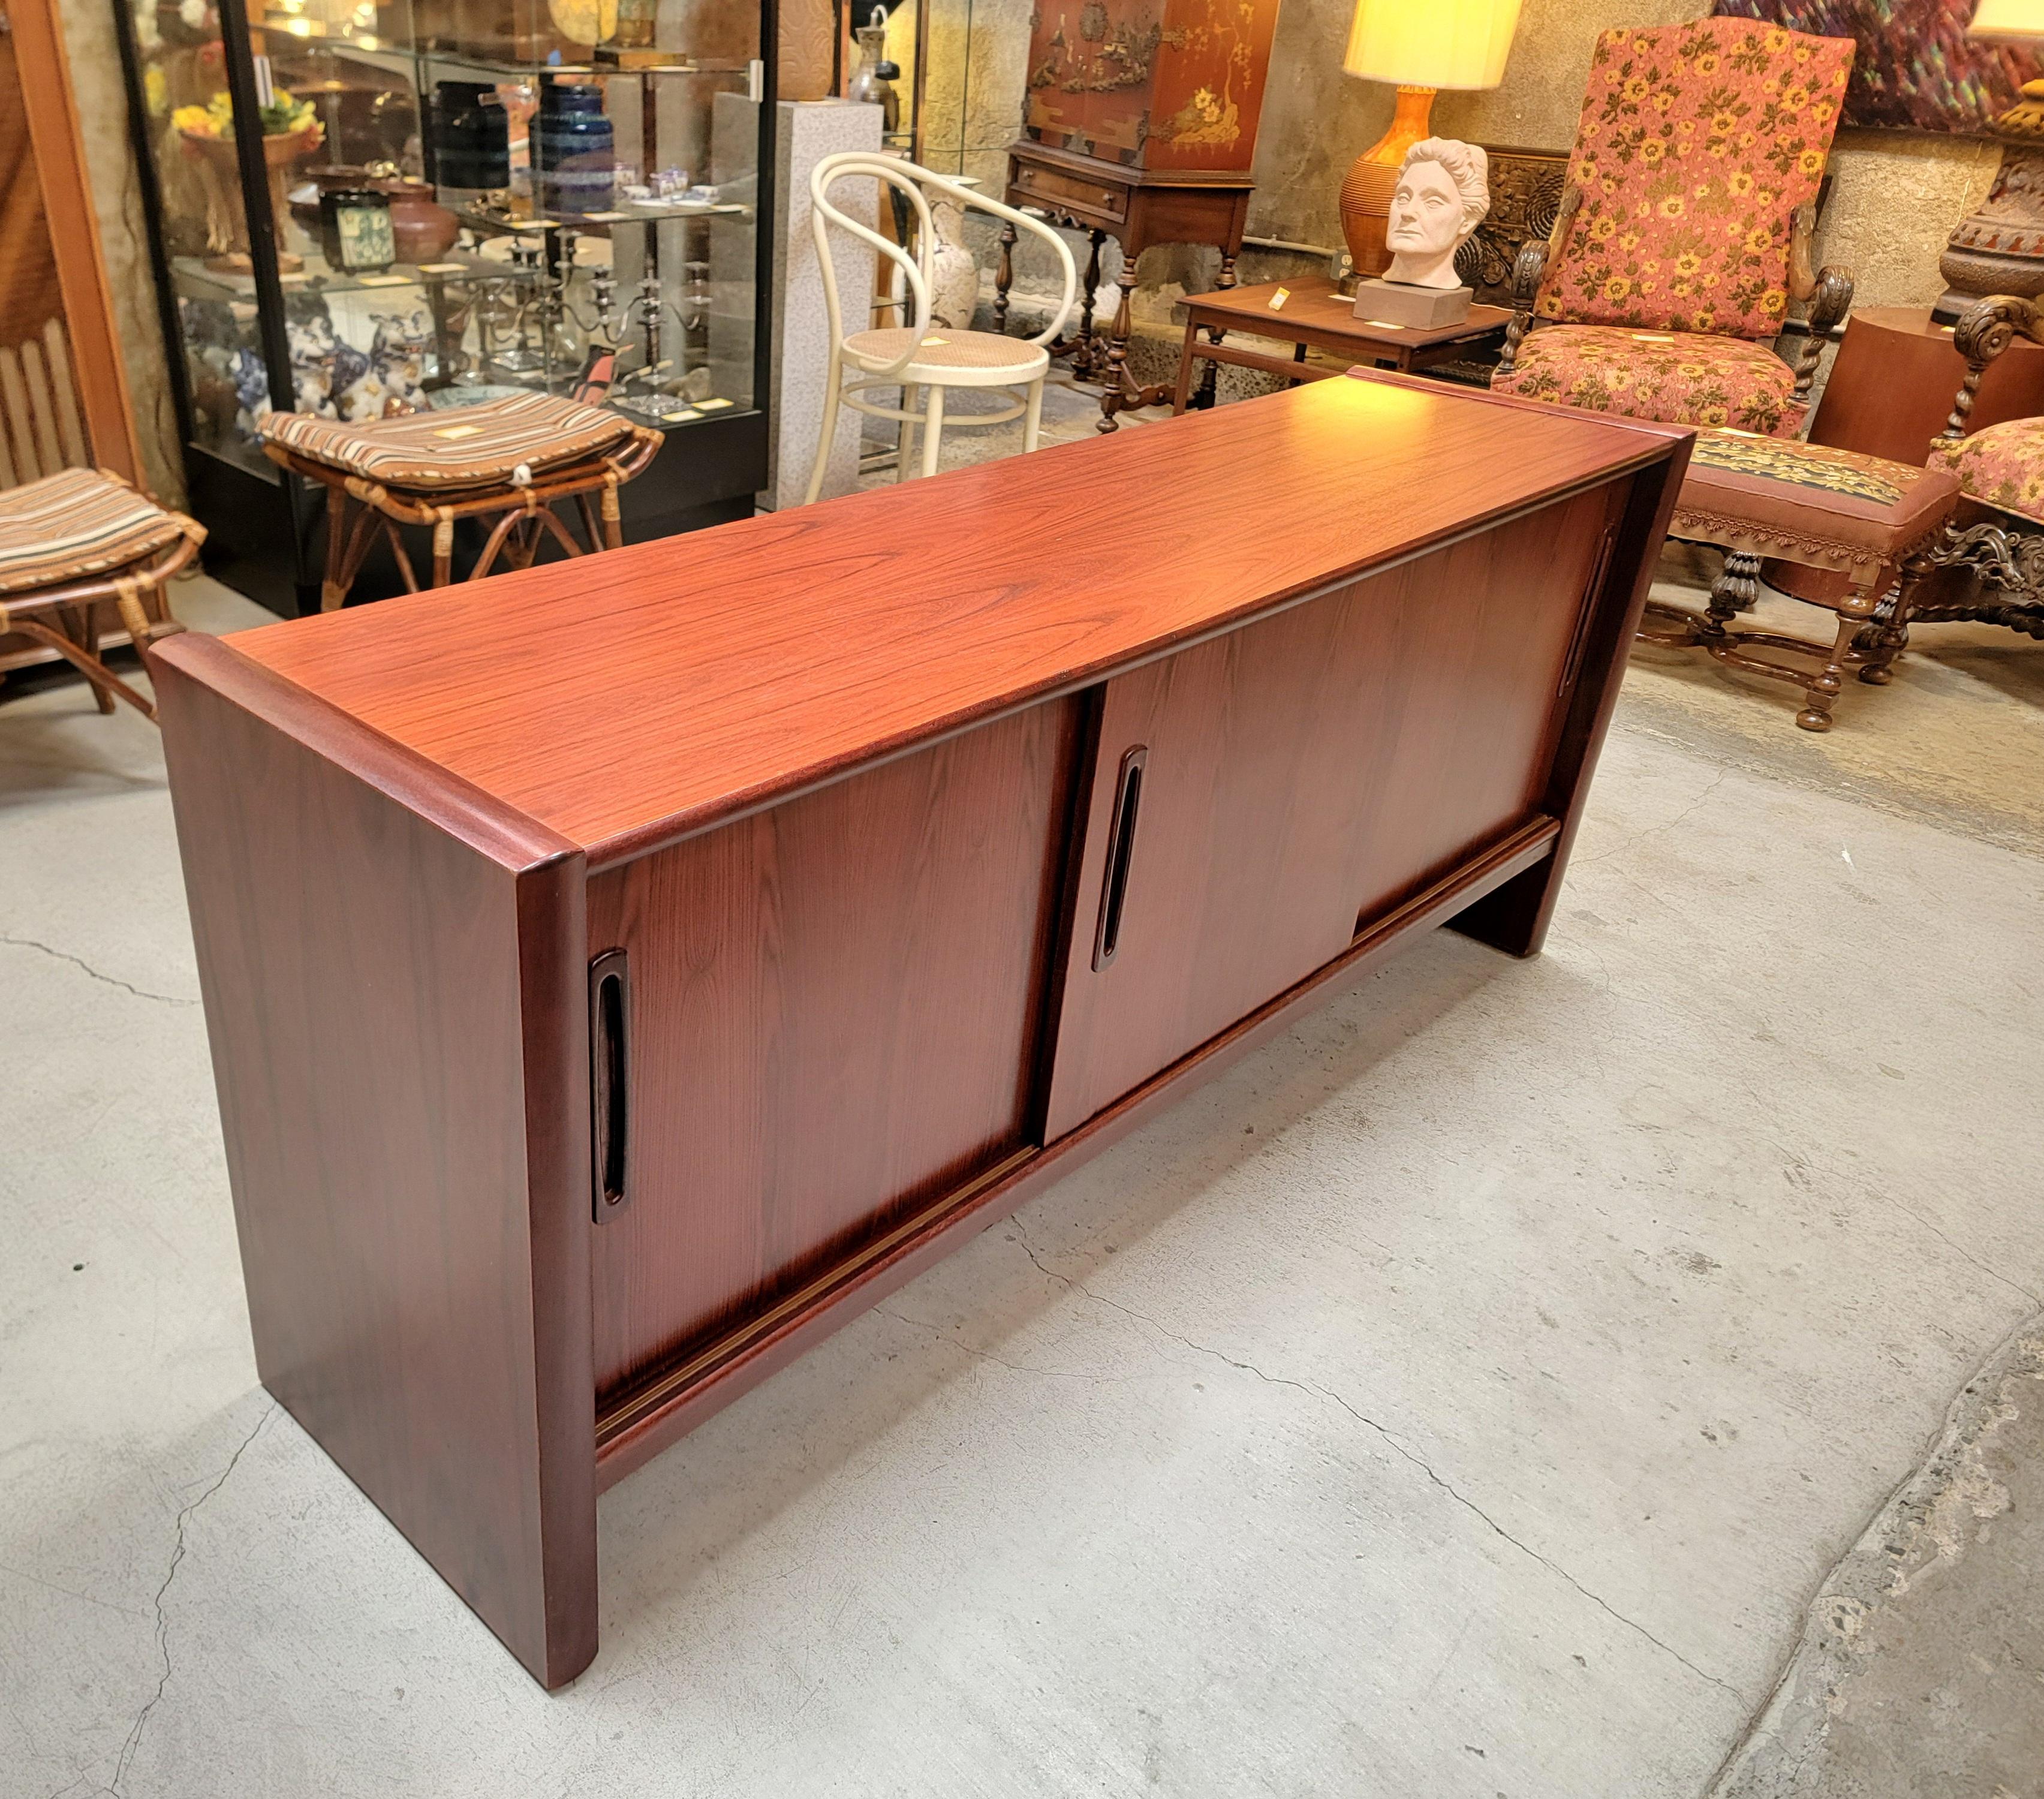 A sliding door rosewood credenza from Denmark. Late 20th century. Beautiful wood grain, in exceptional original condition with very mild wear from use. All doors glide effortlessly. Interior shelving is adjustable. Two interior felt lined flatware